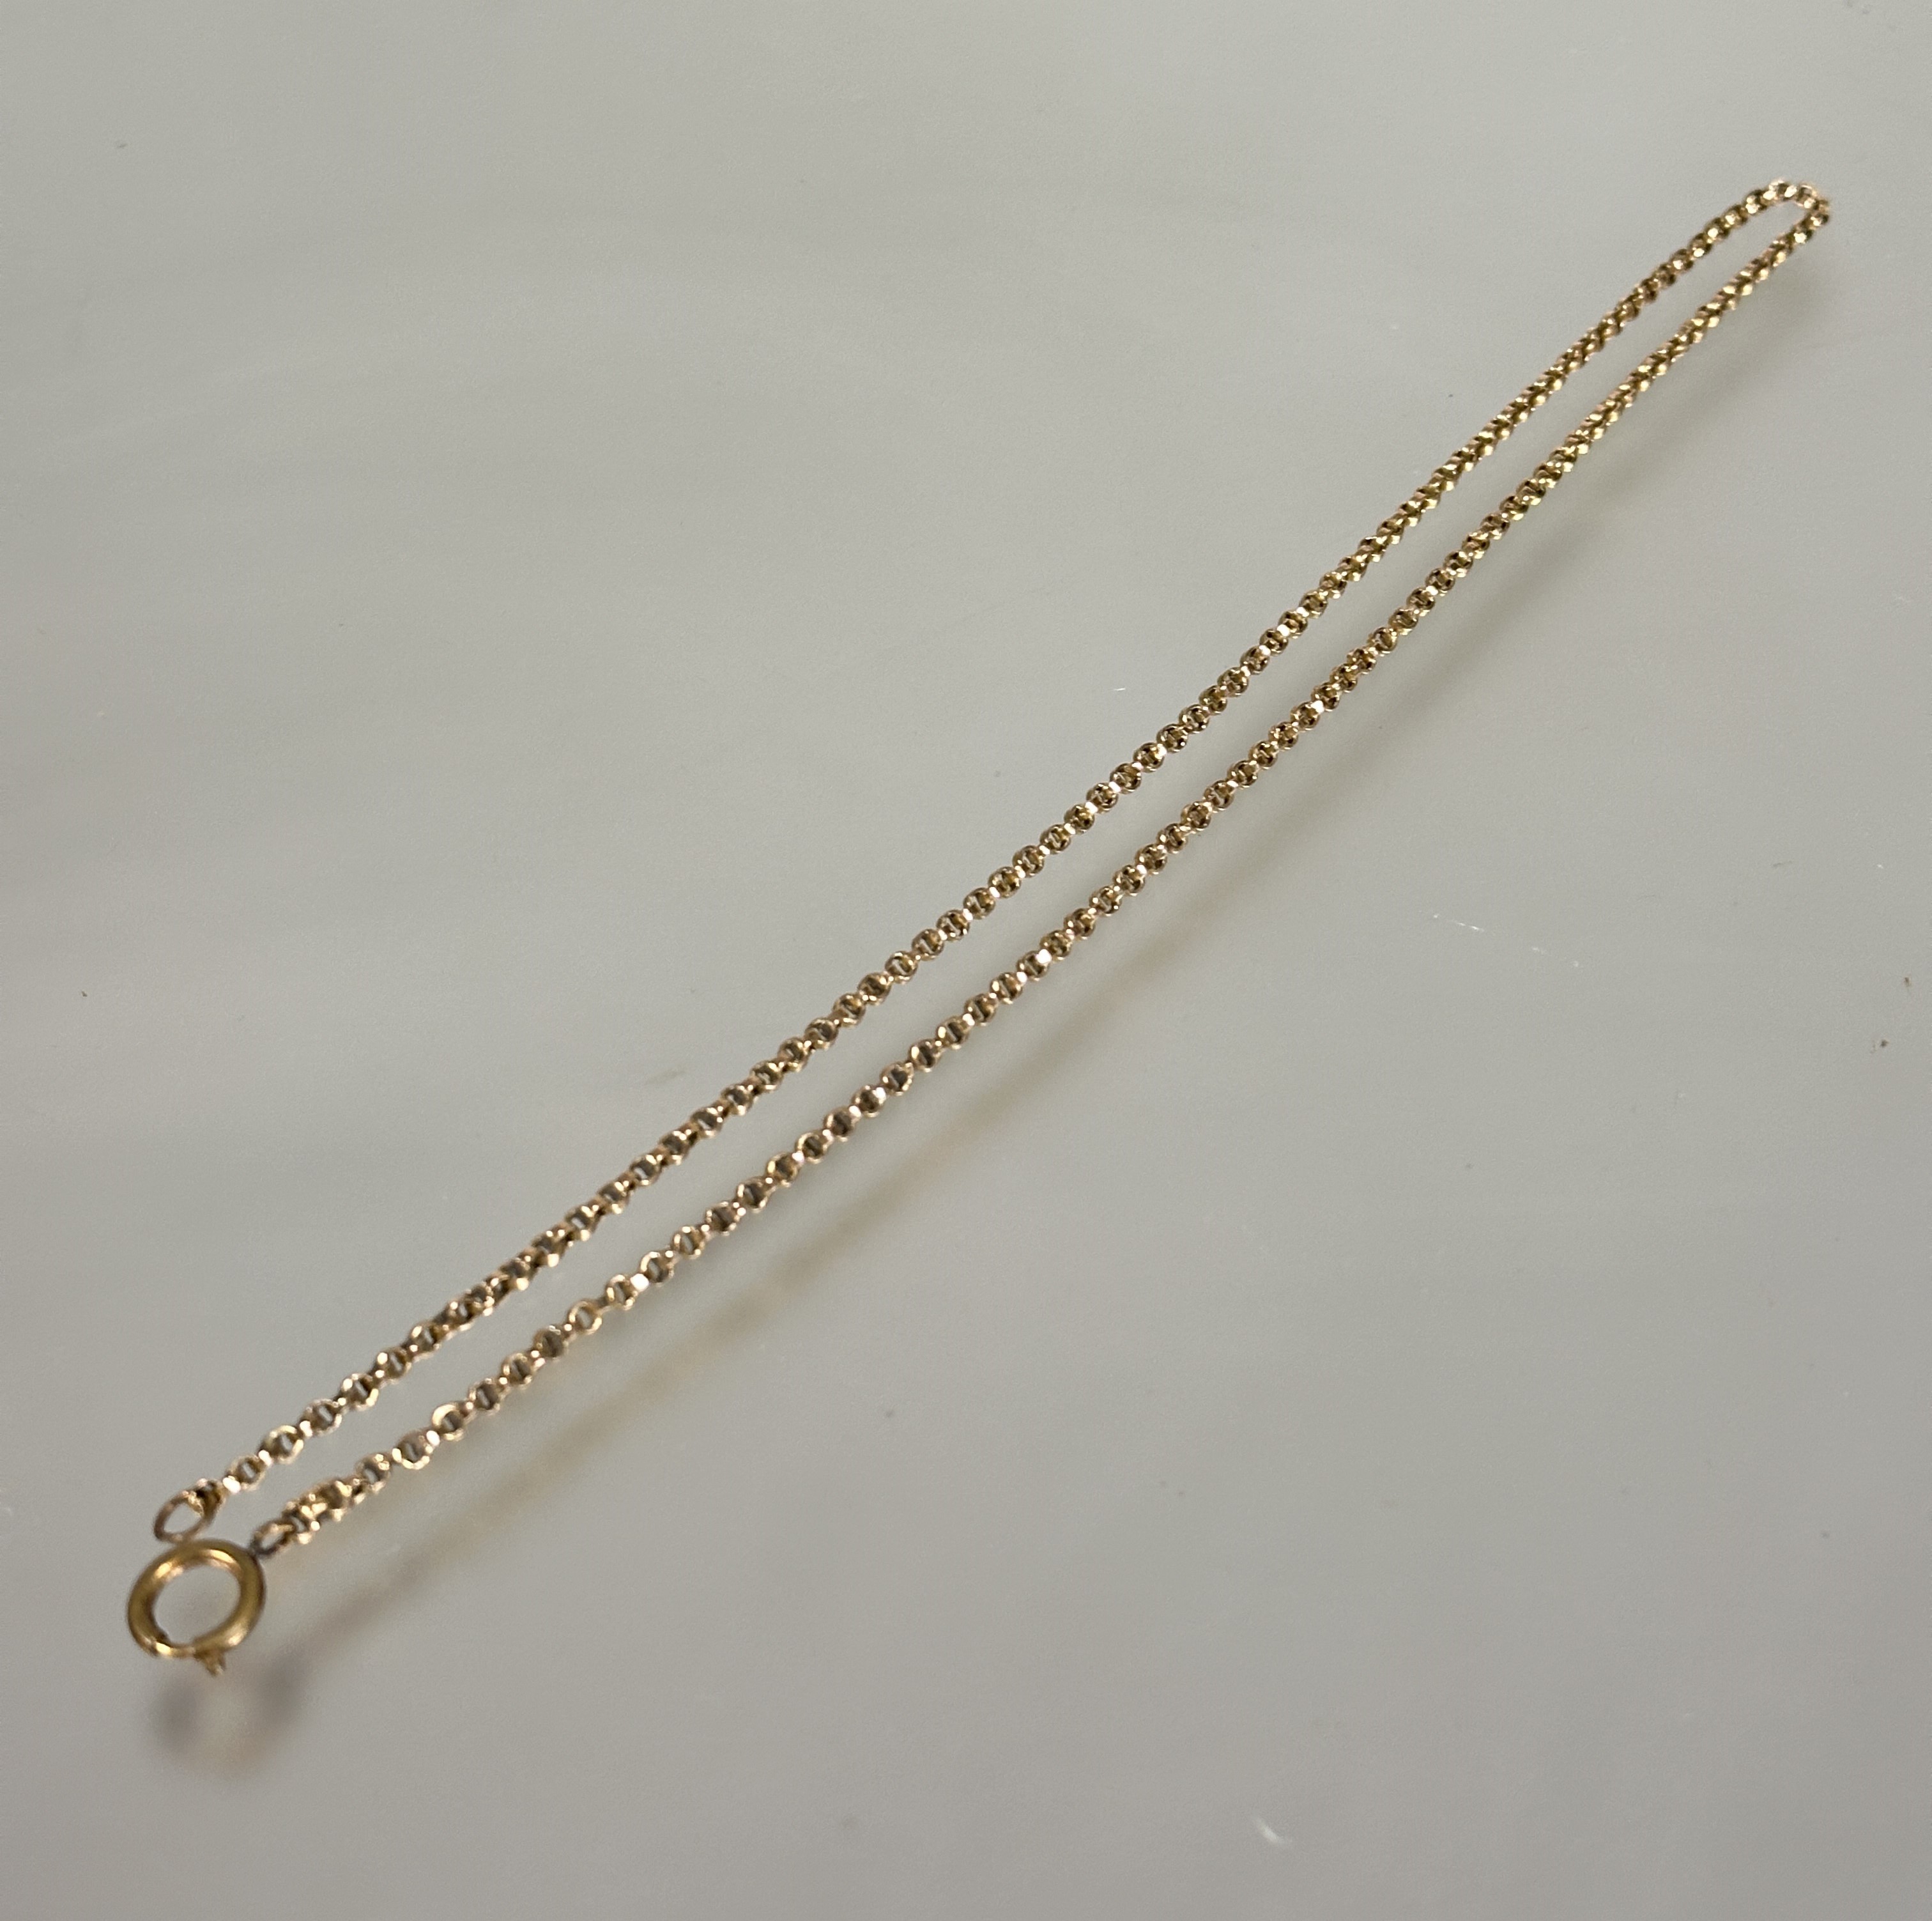 A 9ct gold belcher link guard chain mounted with brass clip fastening, (L x 26.5 cm) 8.5g